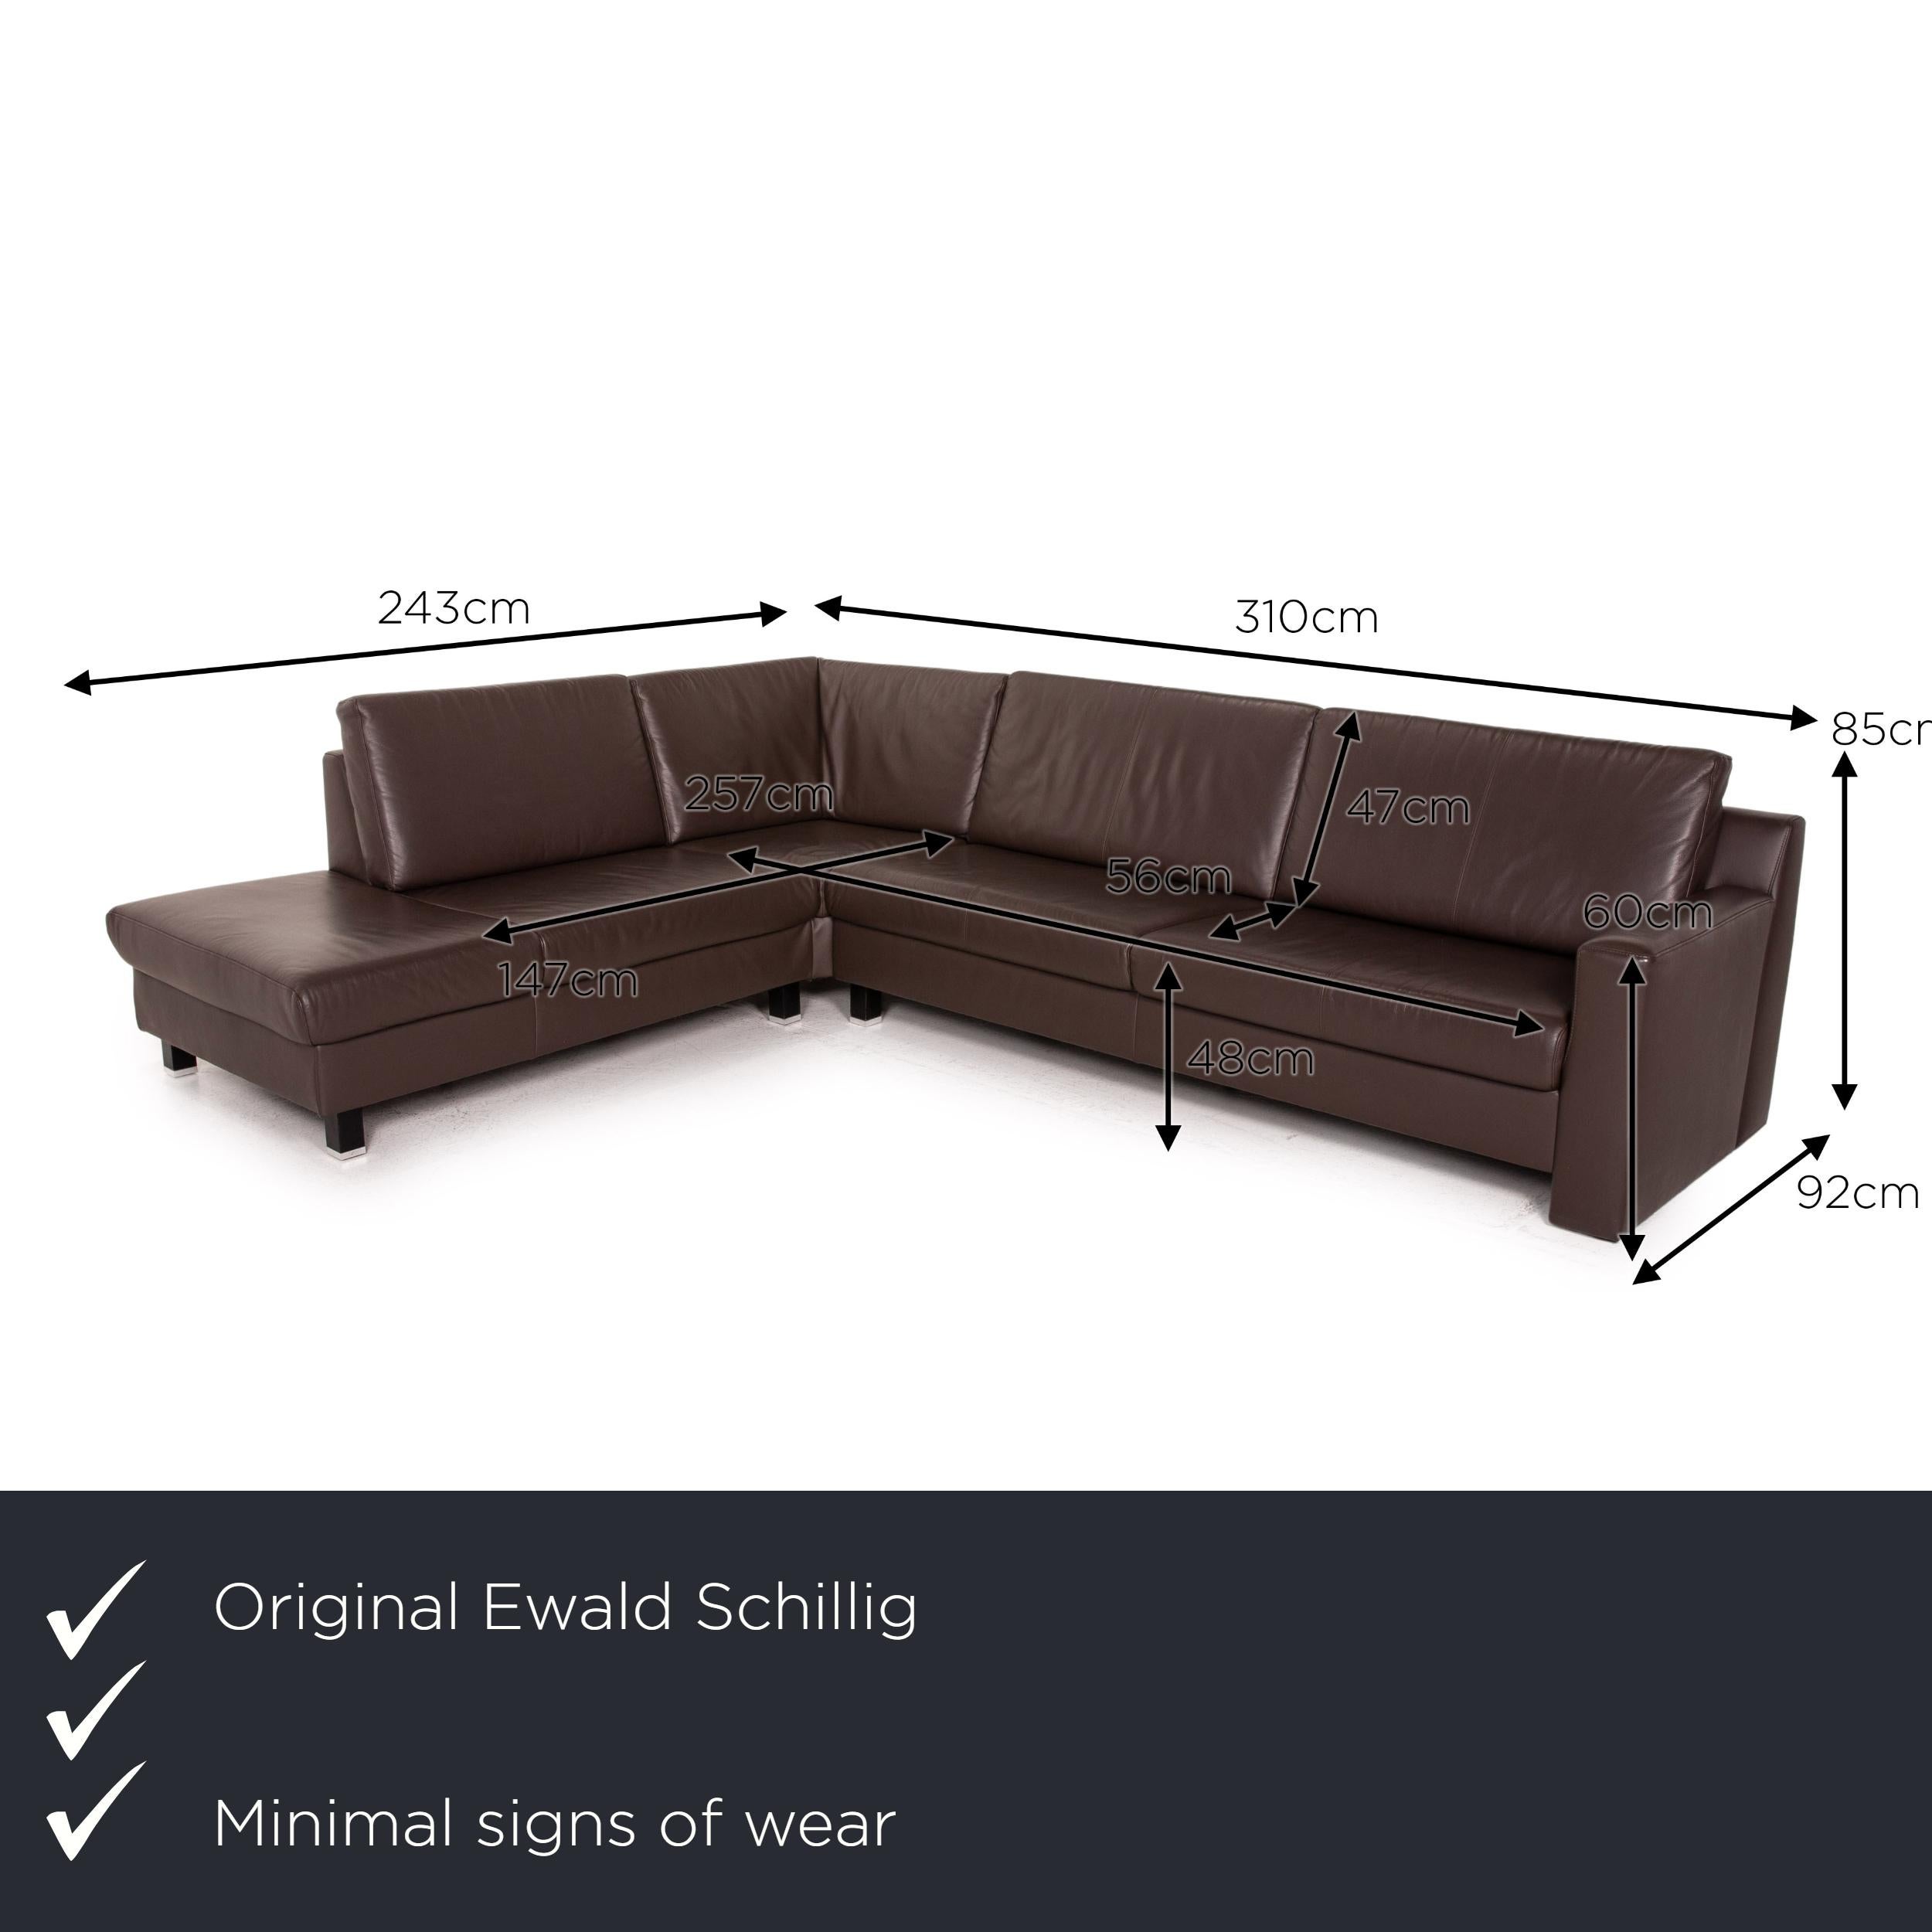 We present to you an Ewald Schillig Flex Plus leather corner sofa brown dark brown sofa couch.


 Product measurements in centimeters:
 

Depth: 92
Width: 243
Height: 85
Seat height: 48
Rest height: 60
Seat depth: 56
Seat width: